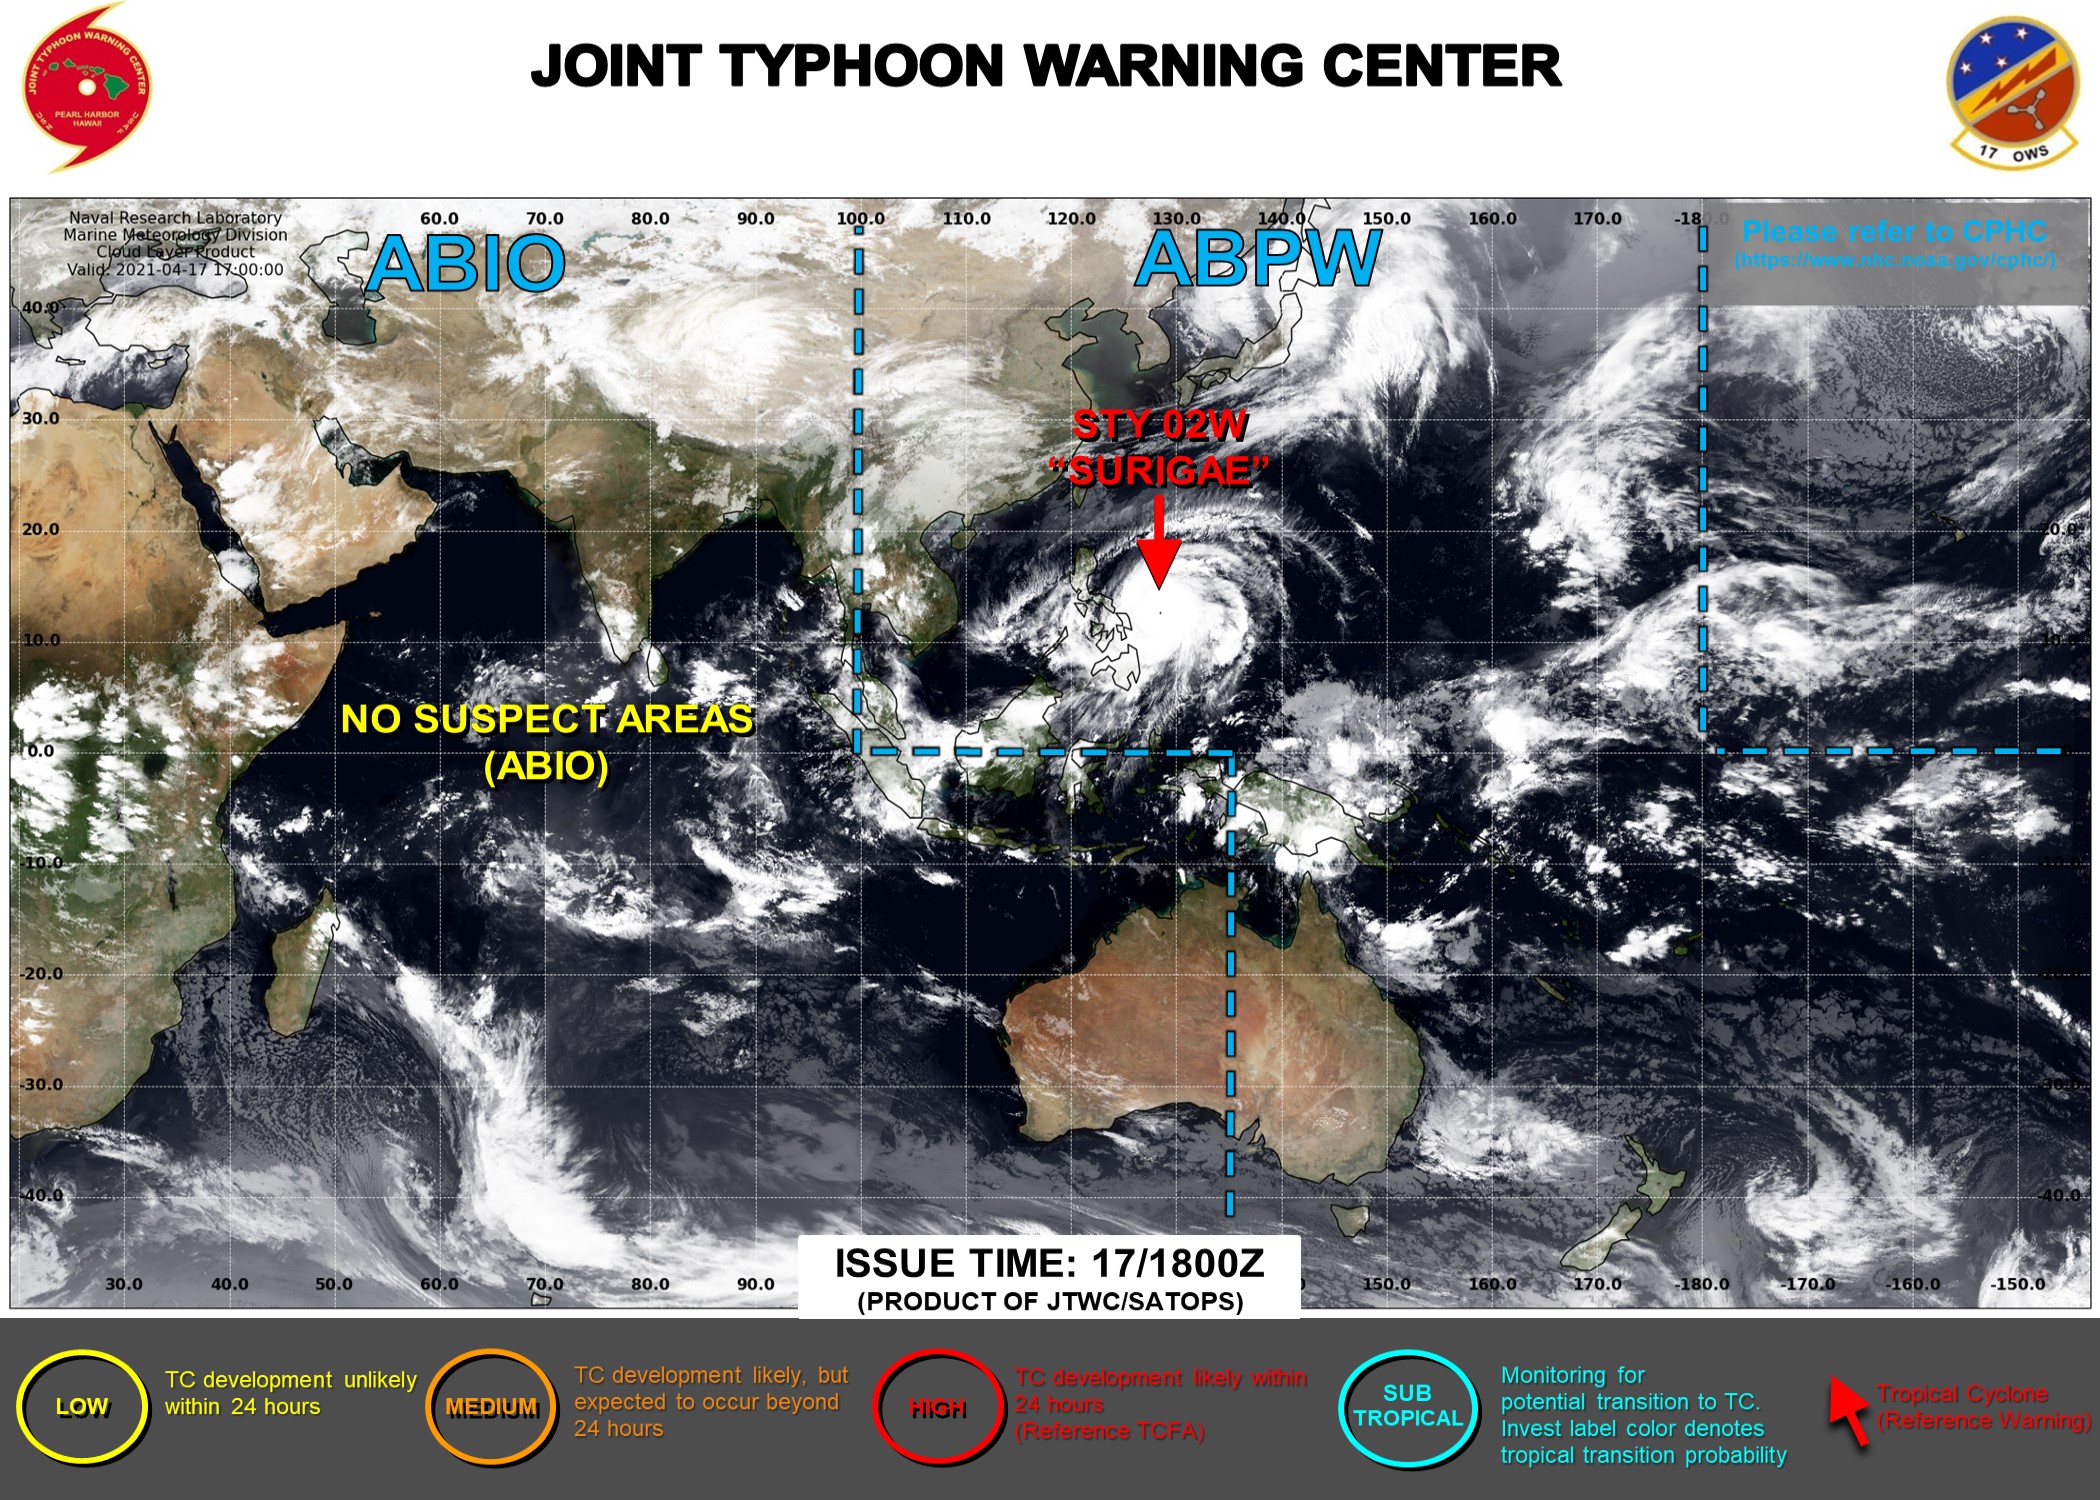 18/03UTC. THE JTWC HAS BEEN ISSUING 6HOURLY WARNINGS ON 02W(SURIGAE) AND 3HOURLY SATELLITE BULLETINS.